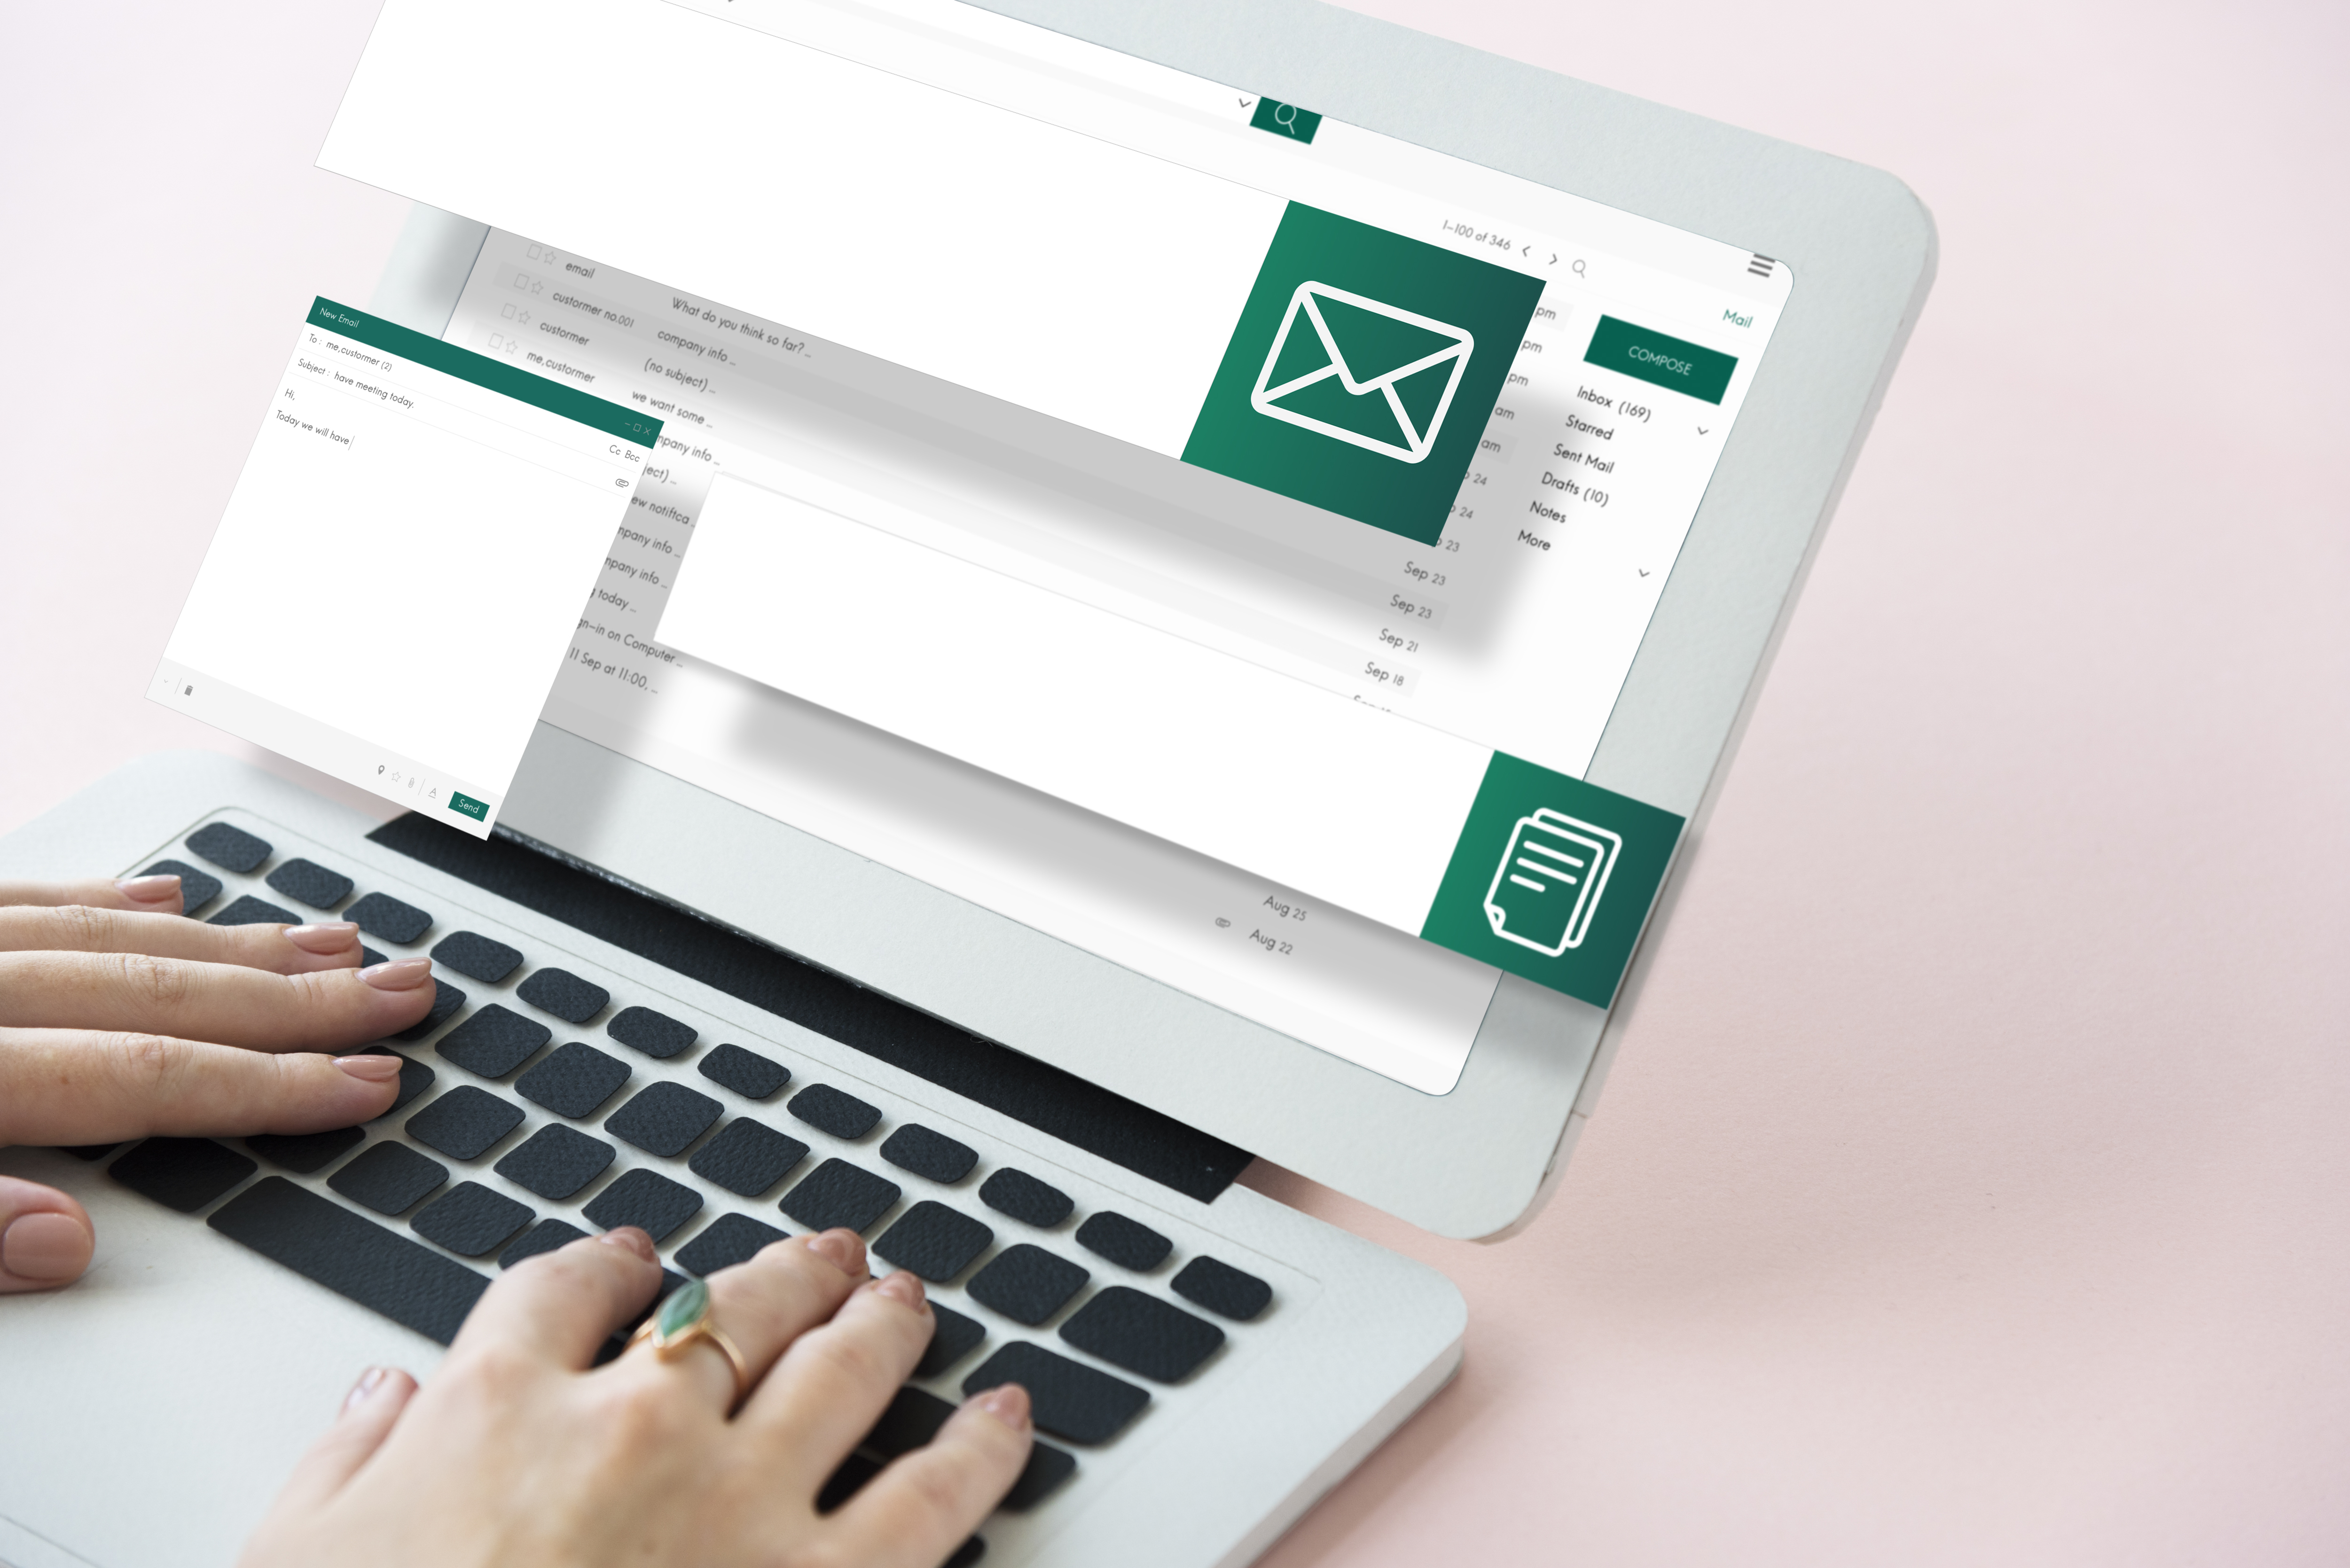 The 10 Best Email Marketing Agencies in Singapore to Increase Opens, Clicks and Sales